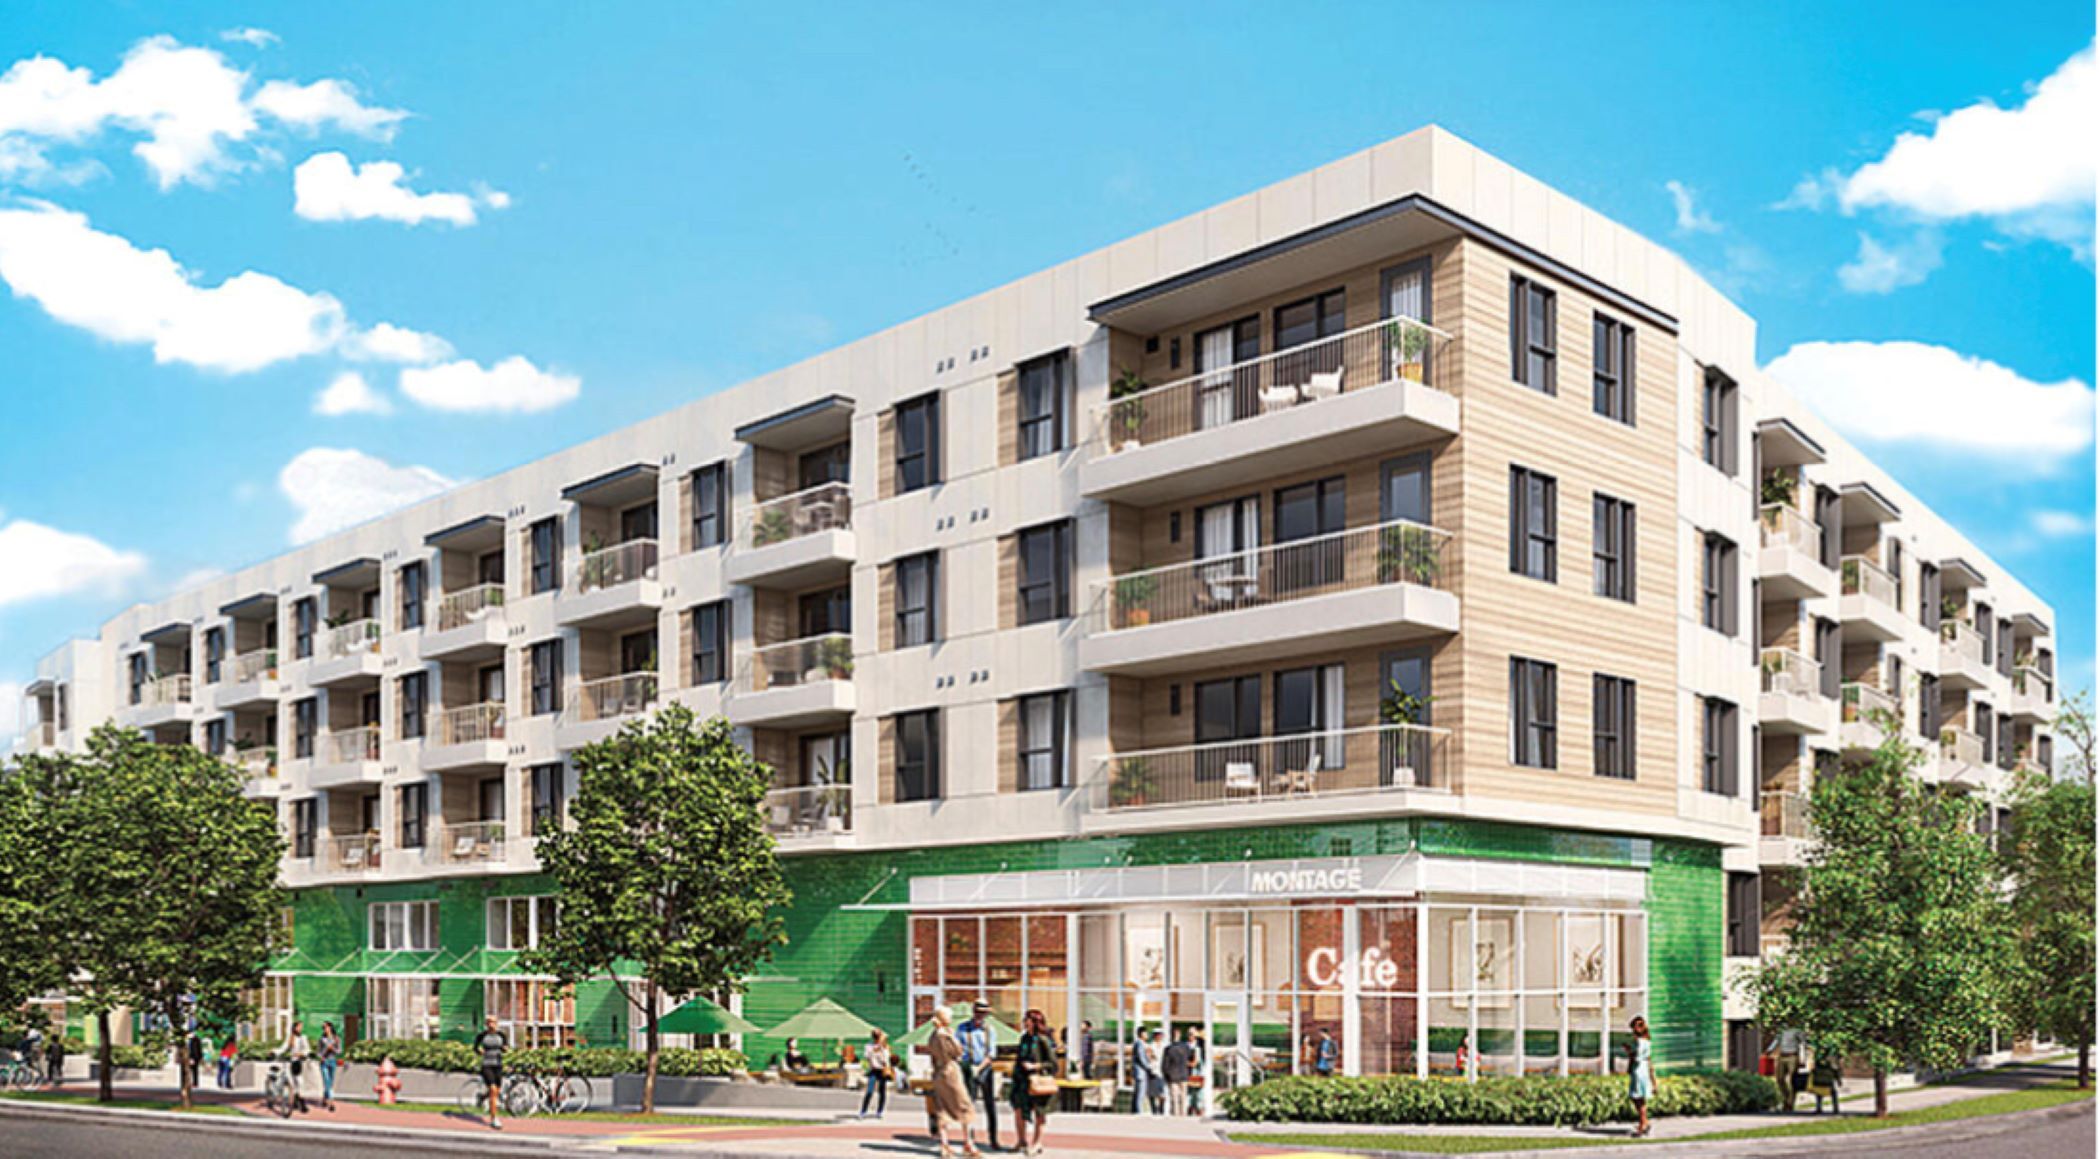 Austin-based Pearlstone Partners has broken ground on Montage, a 182-unit condominium project in South Austin, Texas. (Pearlstone Partners)